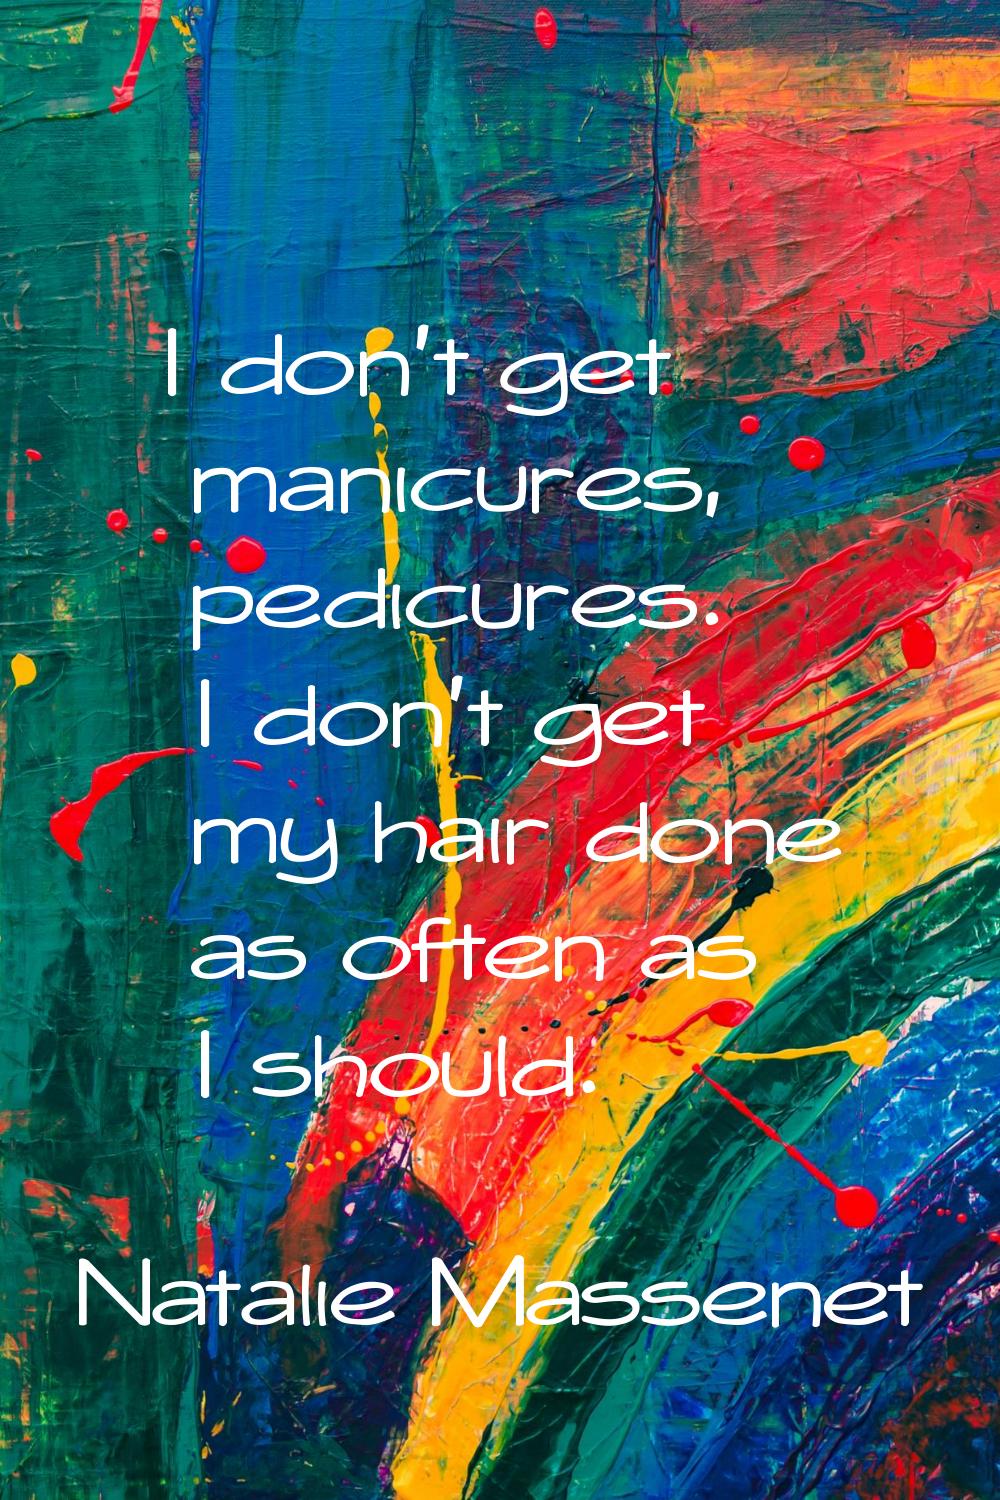 I don't get manicures, pedicures. I don't get my hair done as often as I should.